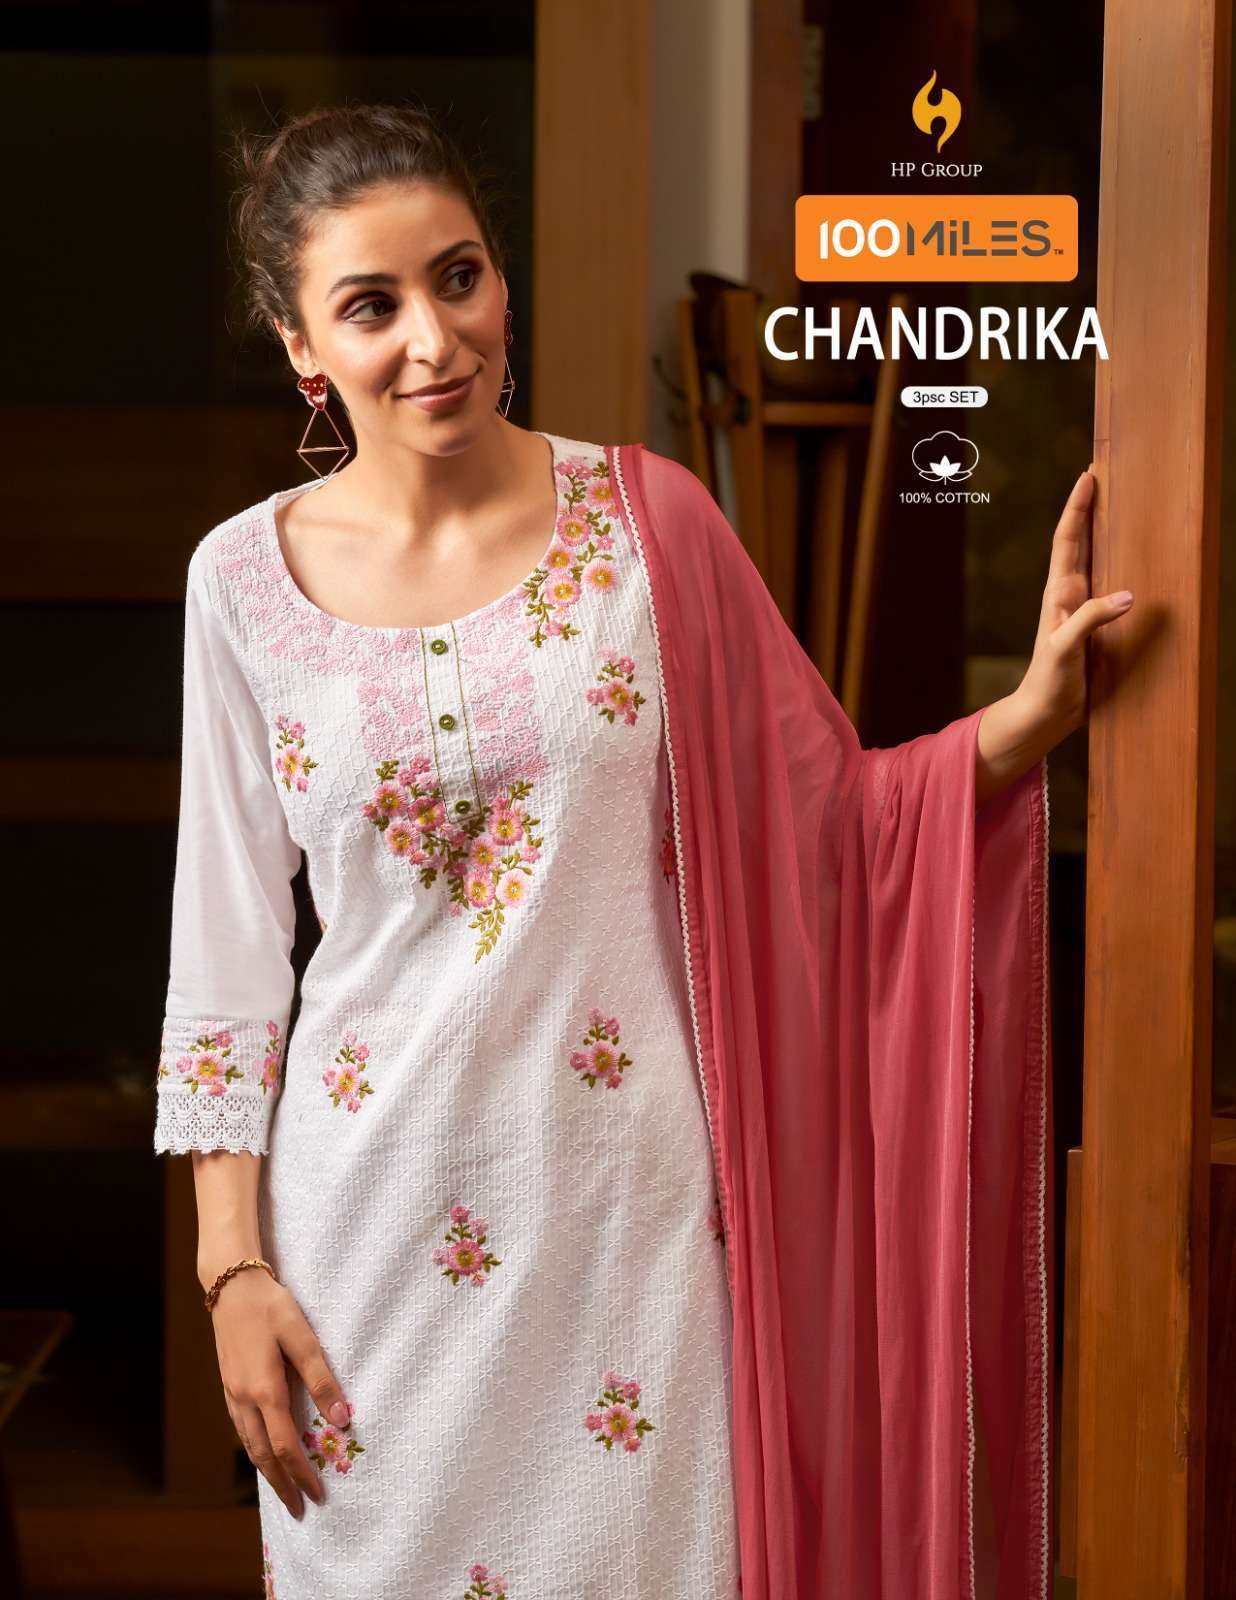 100 miles chandrika series 01-04 pure cotton readymade suit